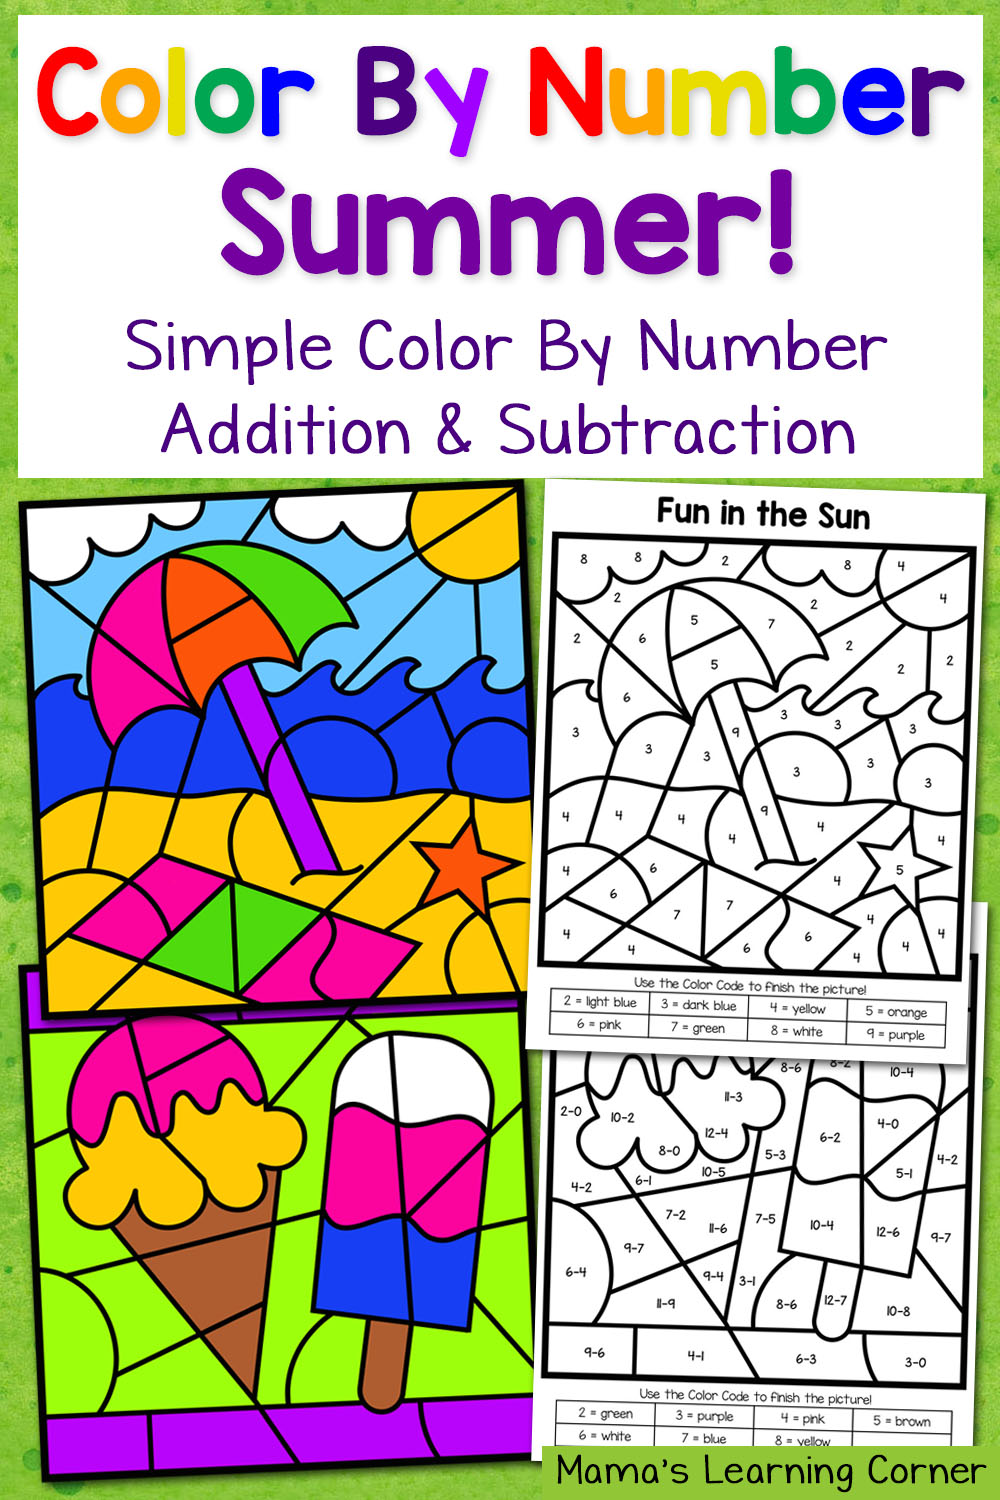 color-by-number-printable-summer-printable-word-searches